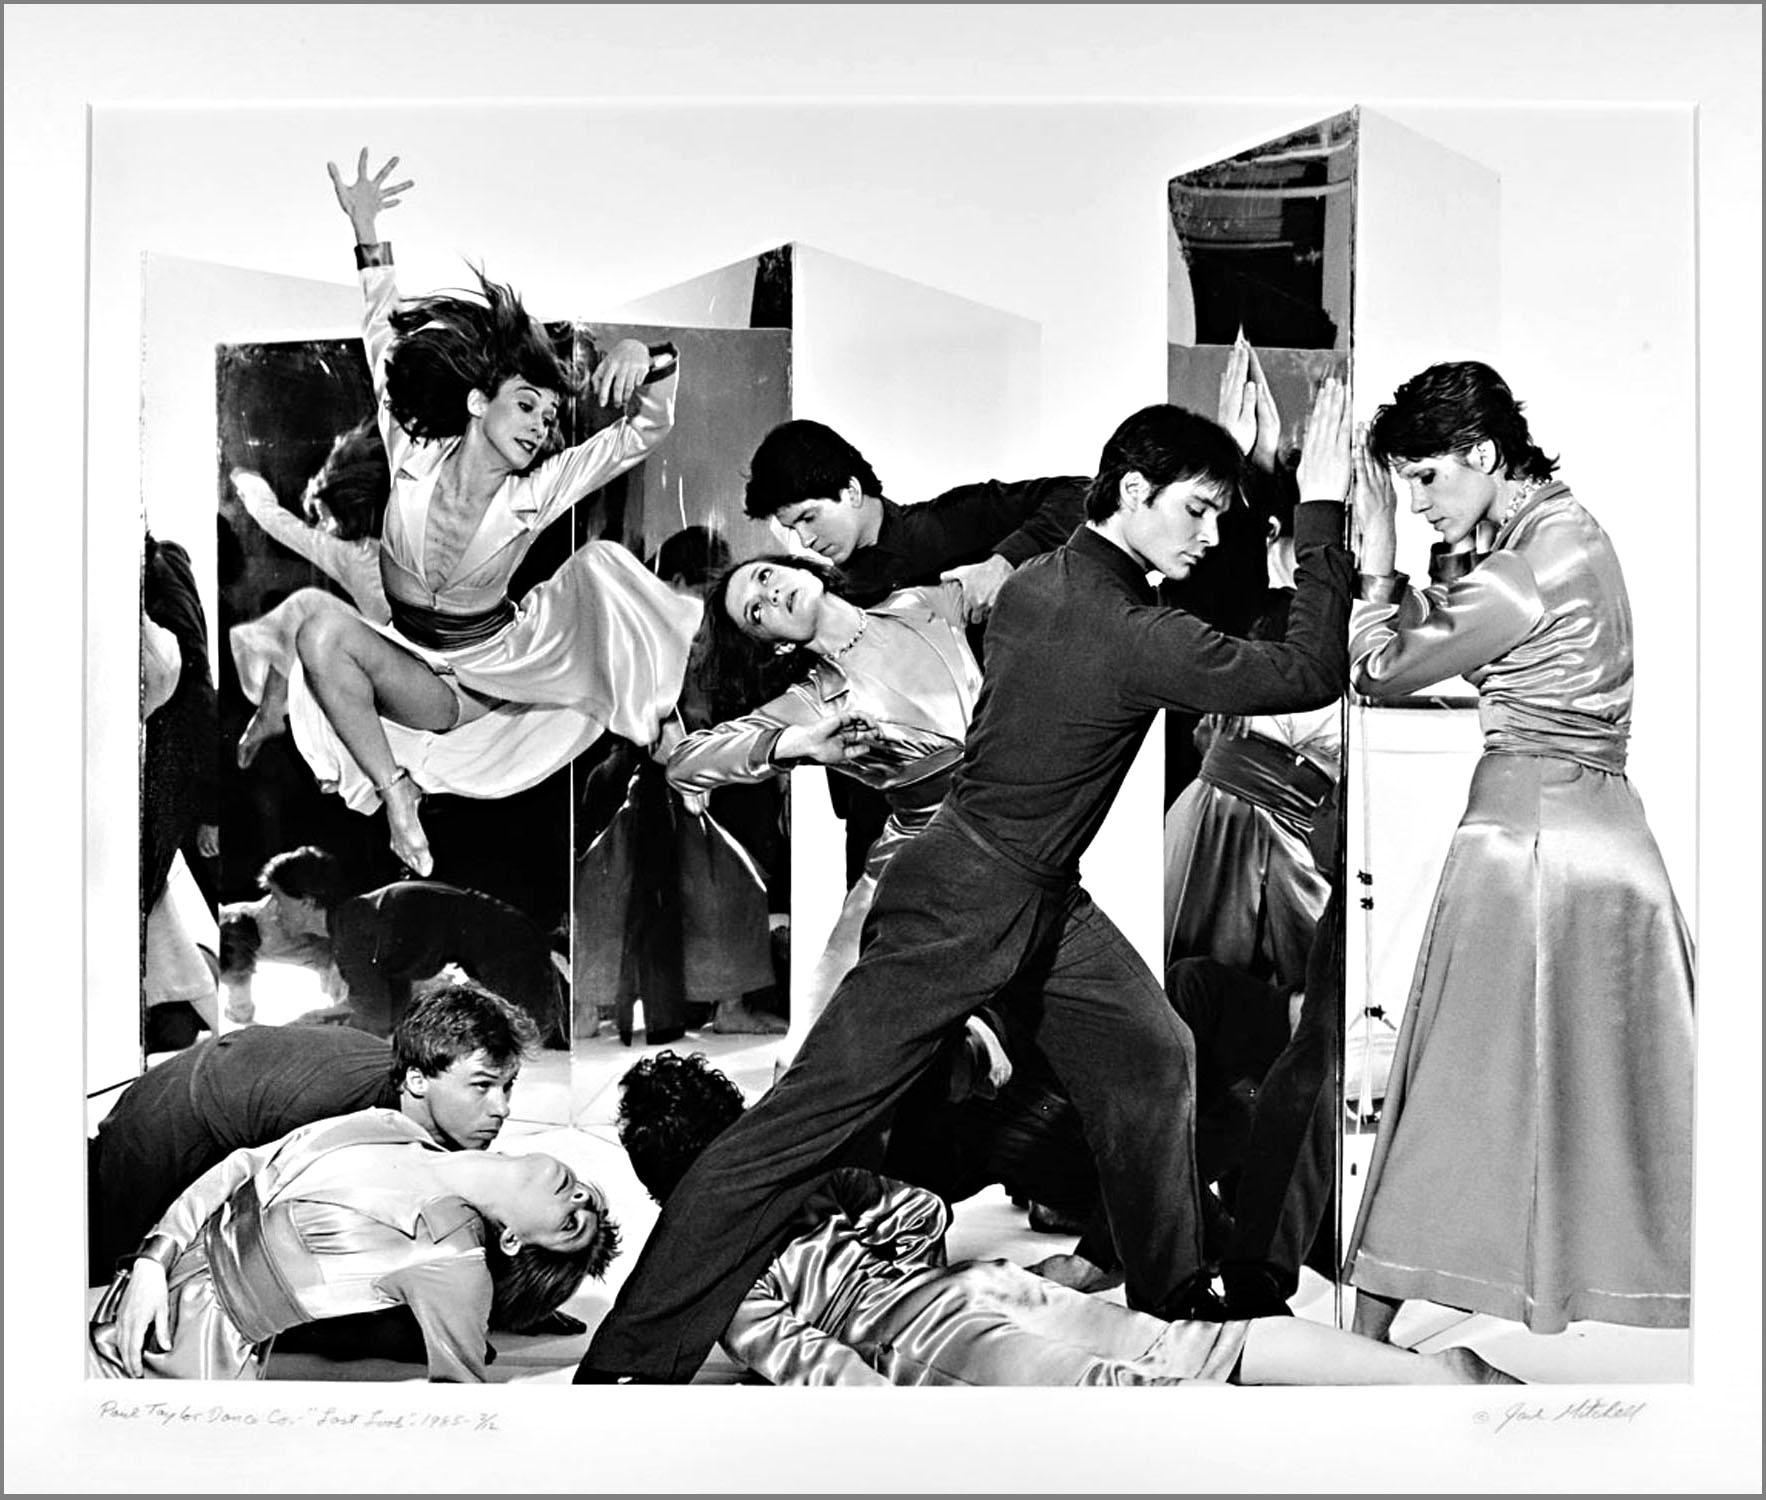 Jack Mitchell Black and White Photograph - Paul Taylor Dance Company performing 'Last Look', signed exhibition print